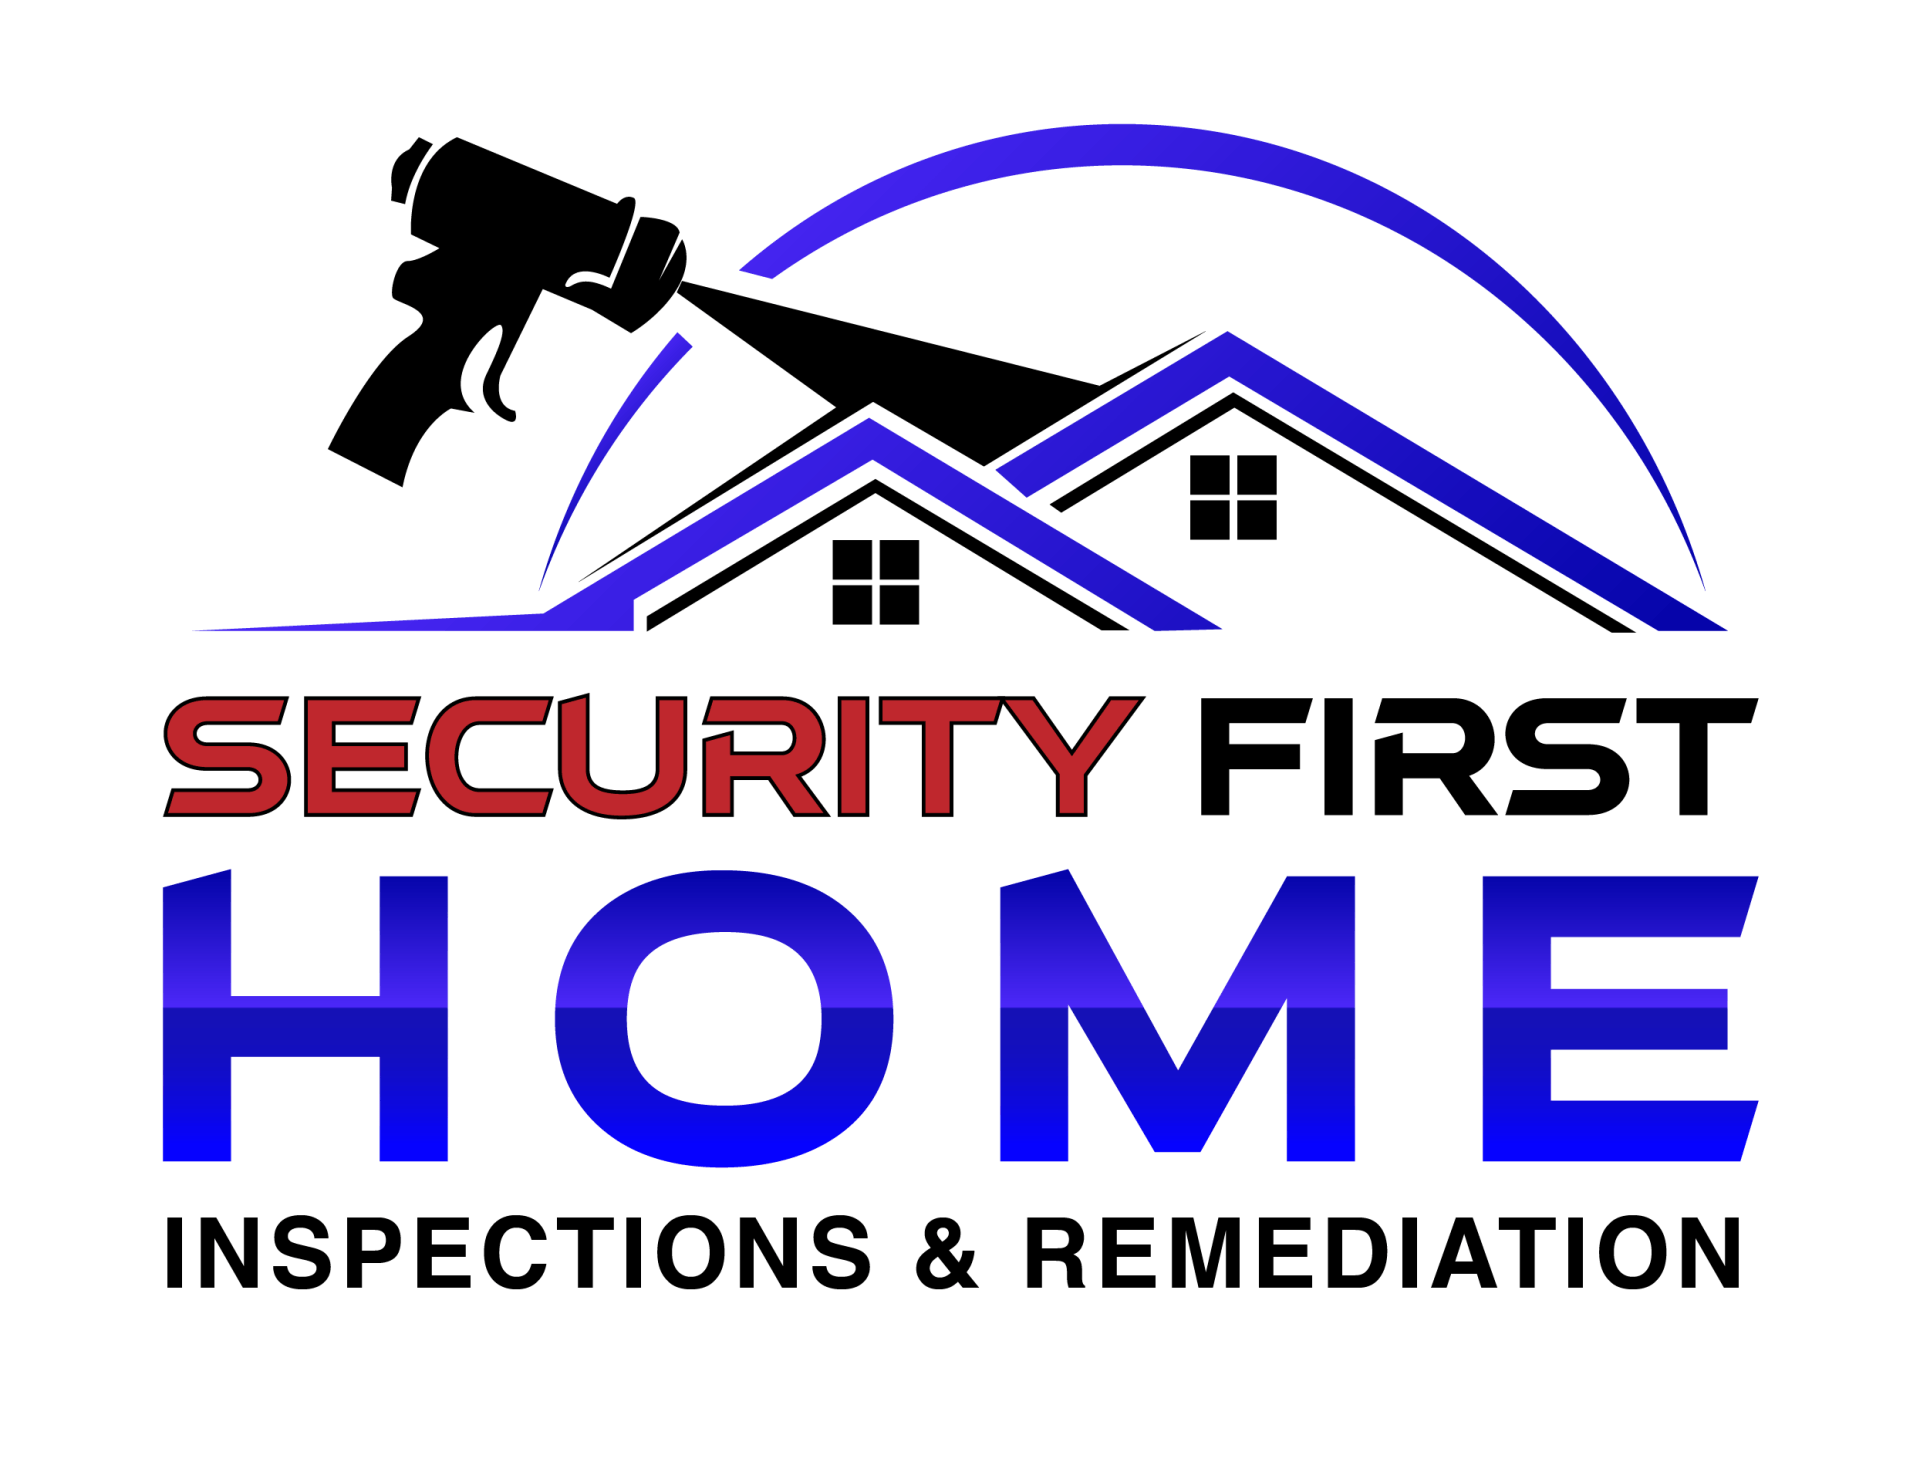 Security First Home Inspections & Remediation